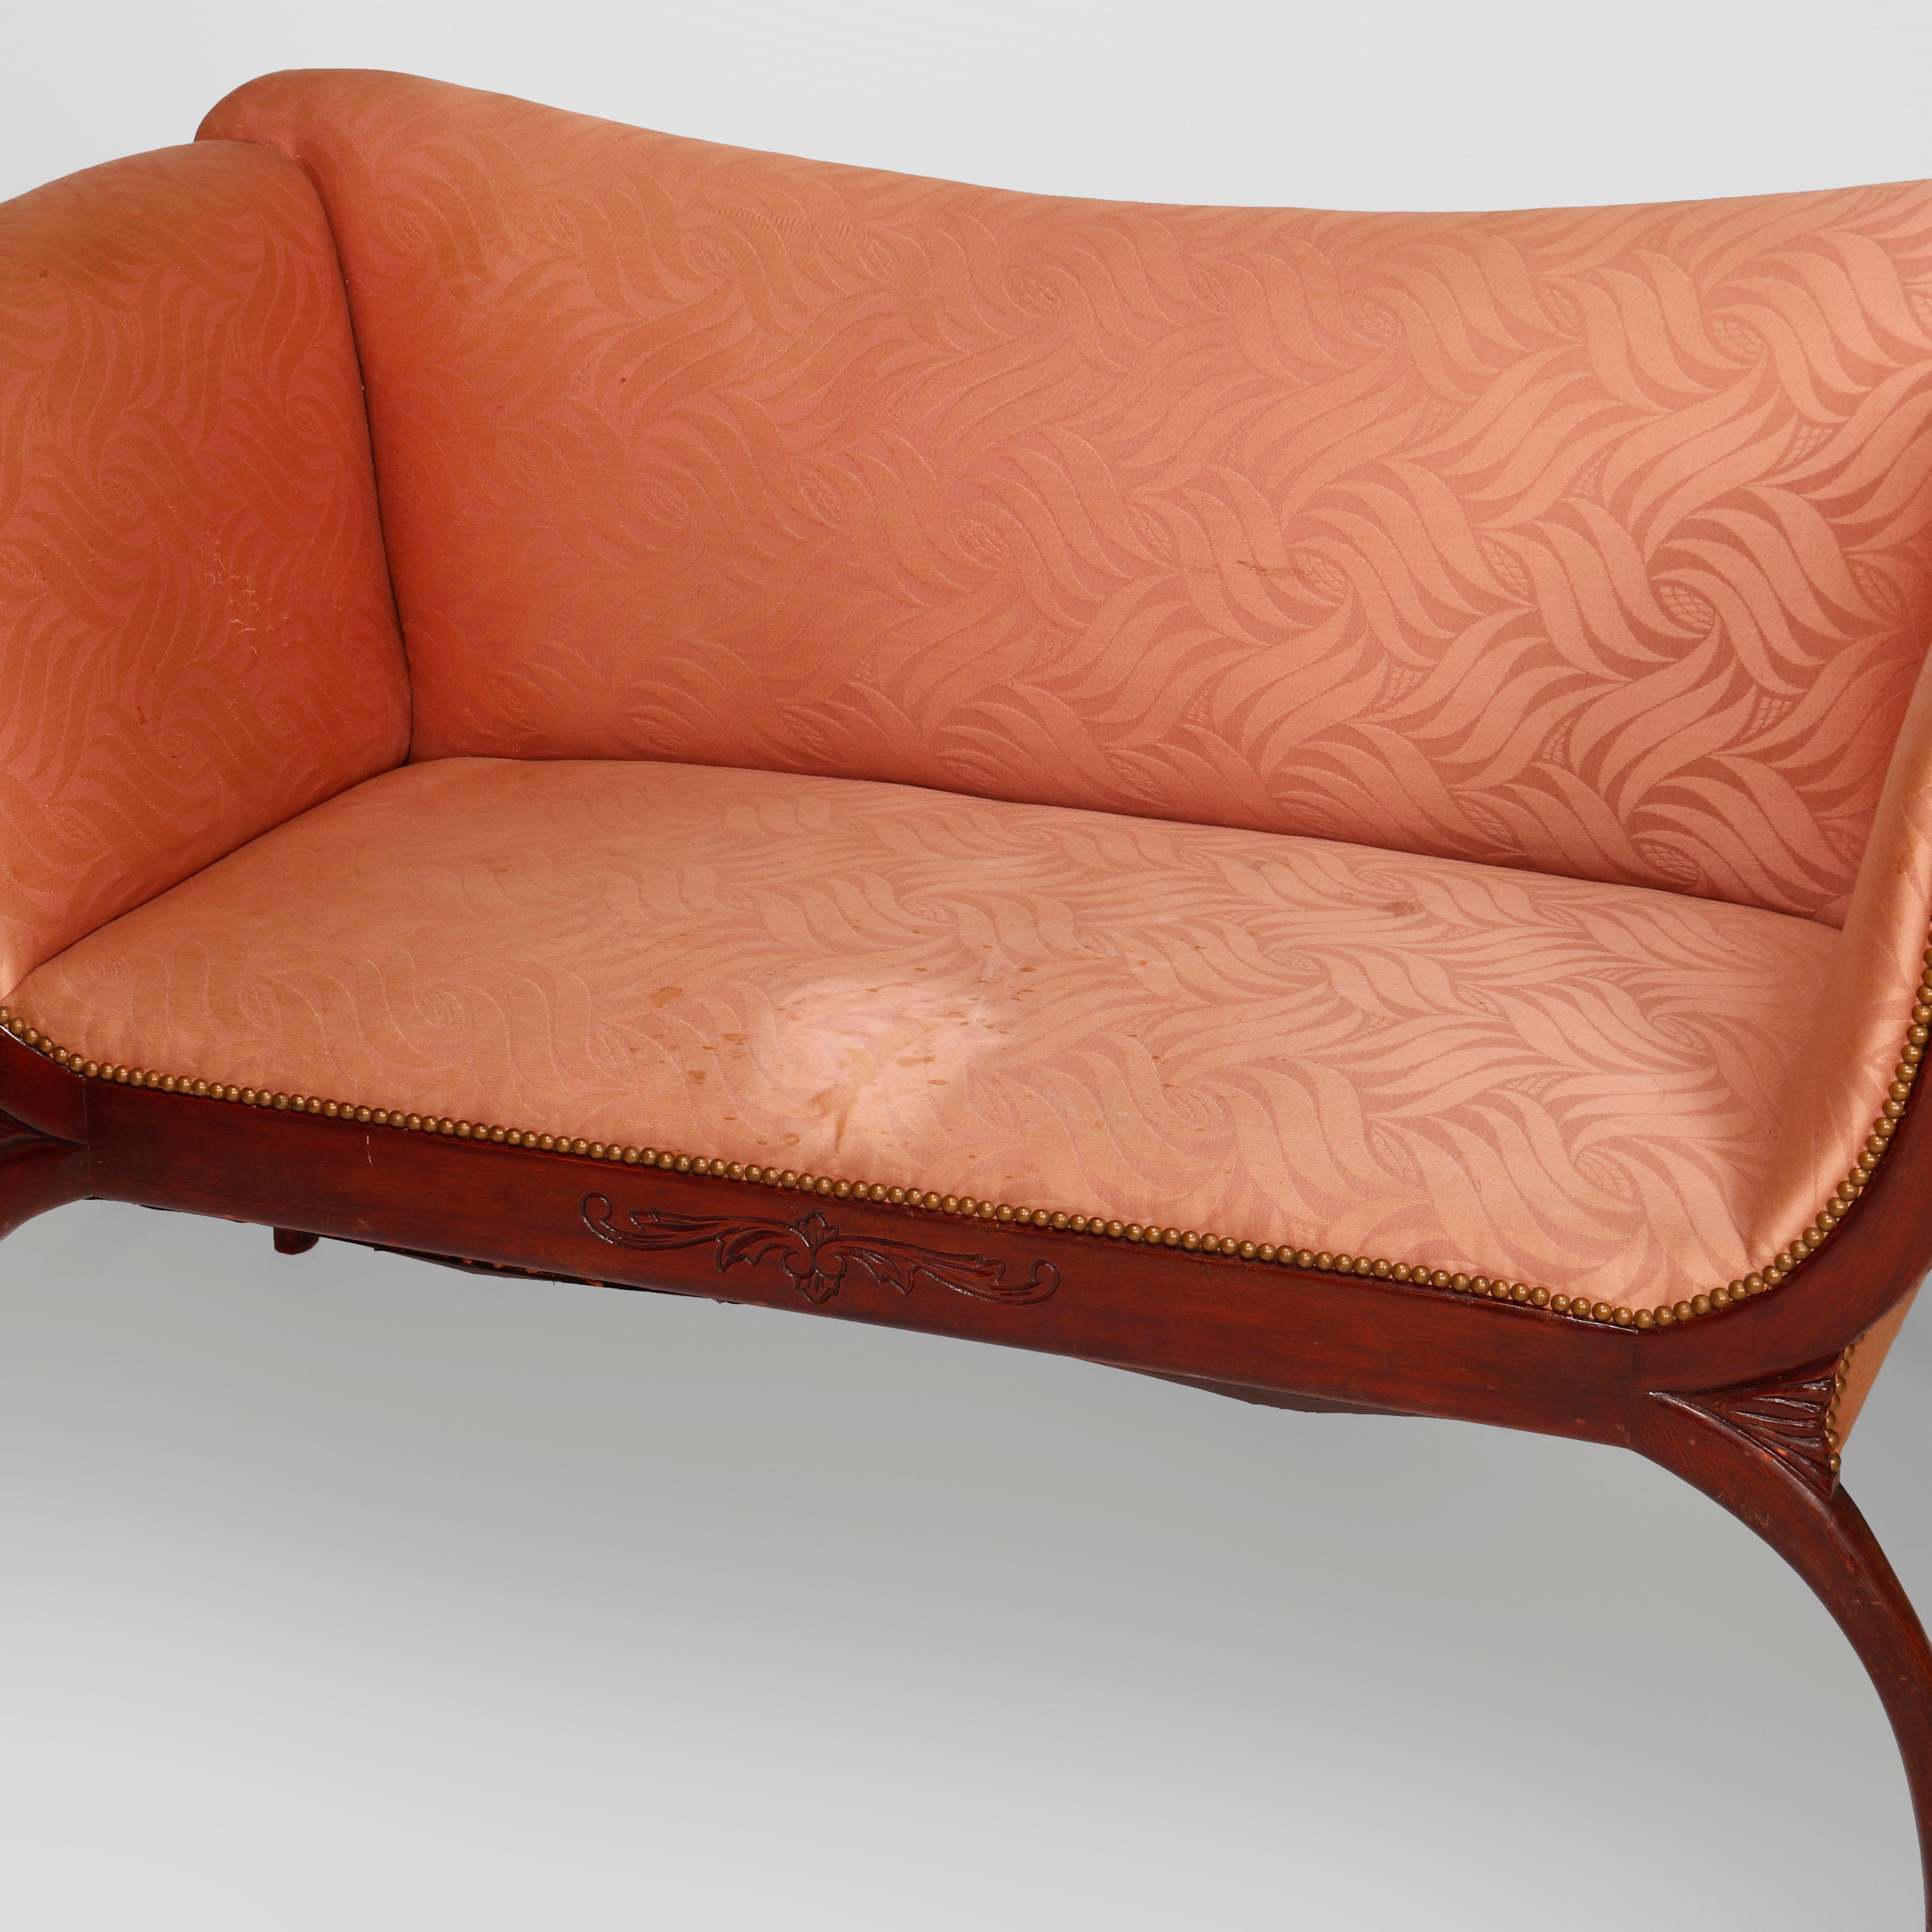 Antique Classical Continental Carved Mahogany Upholstered Settee, Circa 1920 In Good Condition For Sale In Big Flats, NY